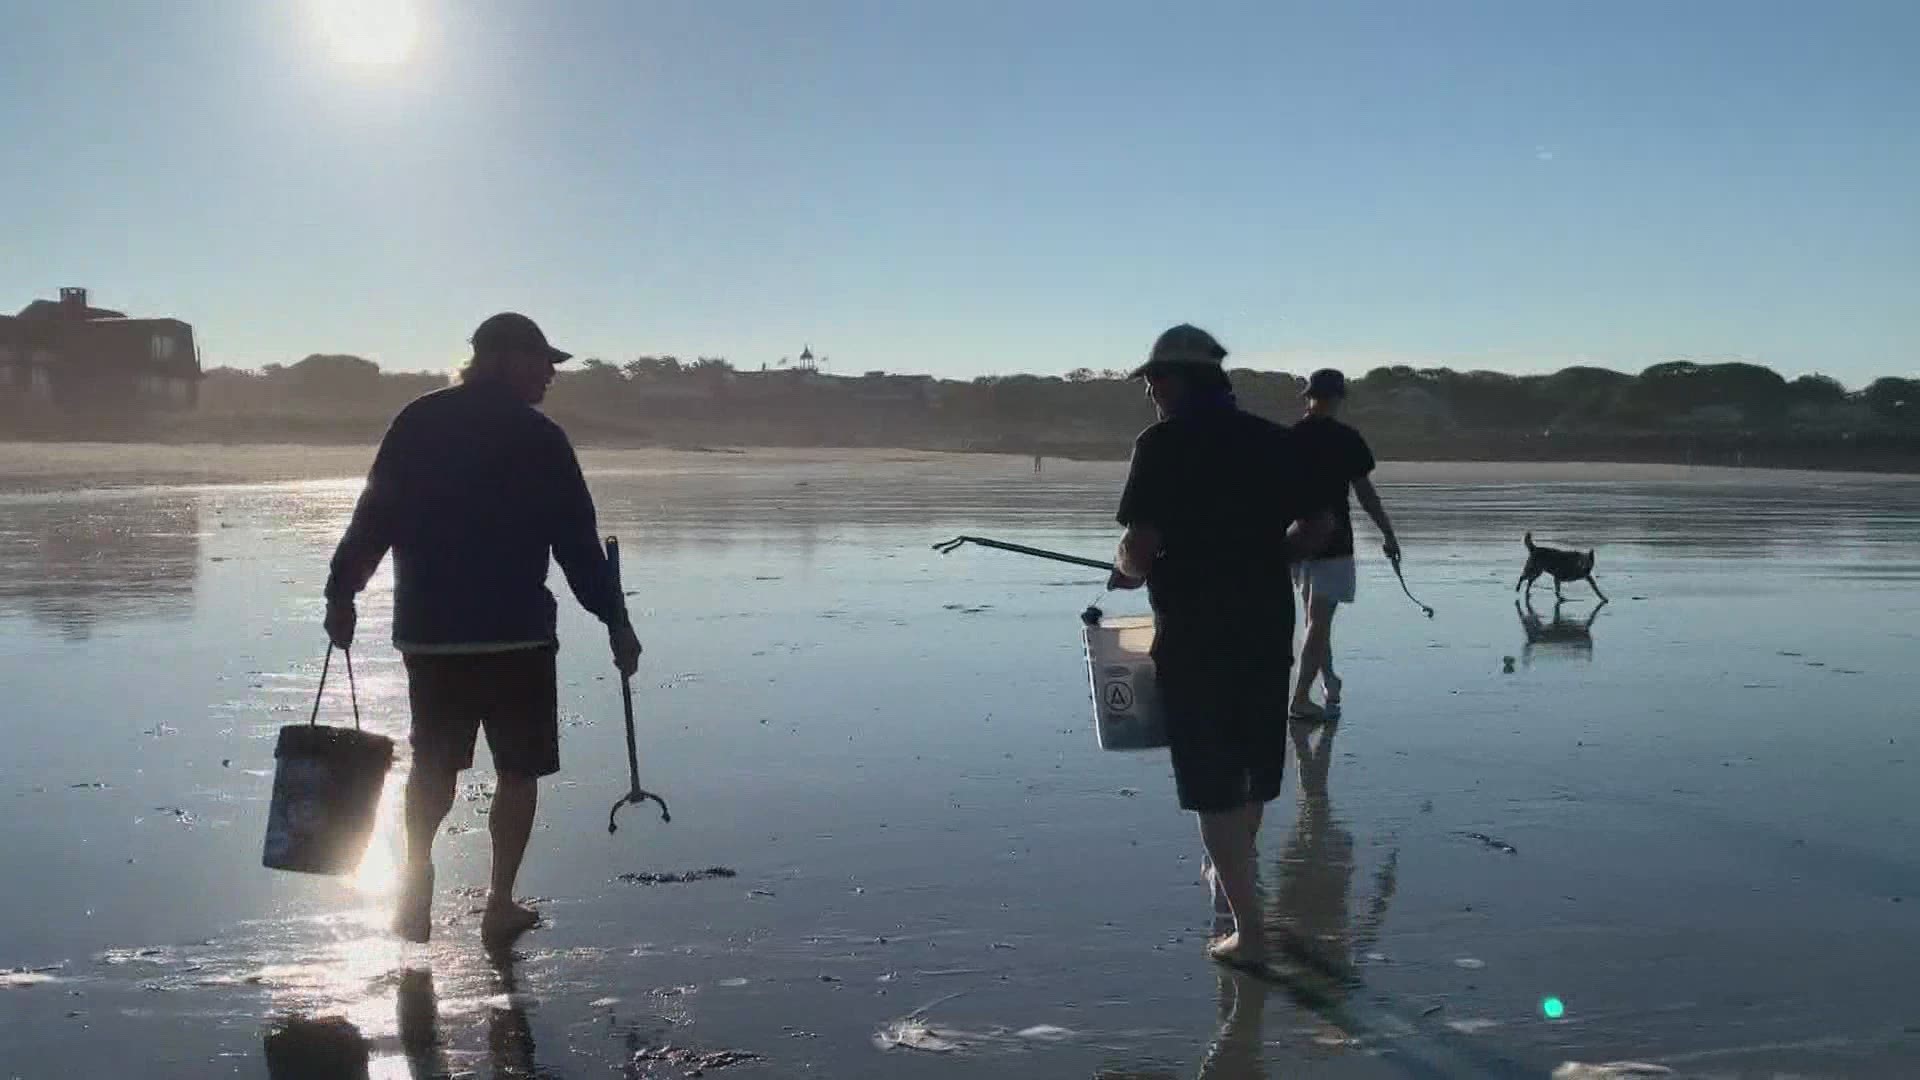 Steve Ross and Dave Ogden want to keep their community clean and safe so every morning at 6 a.m. they walk Gooches Beach in Kennebunk and pick up trash.